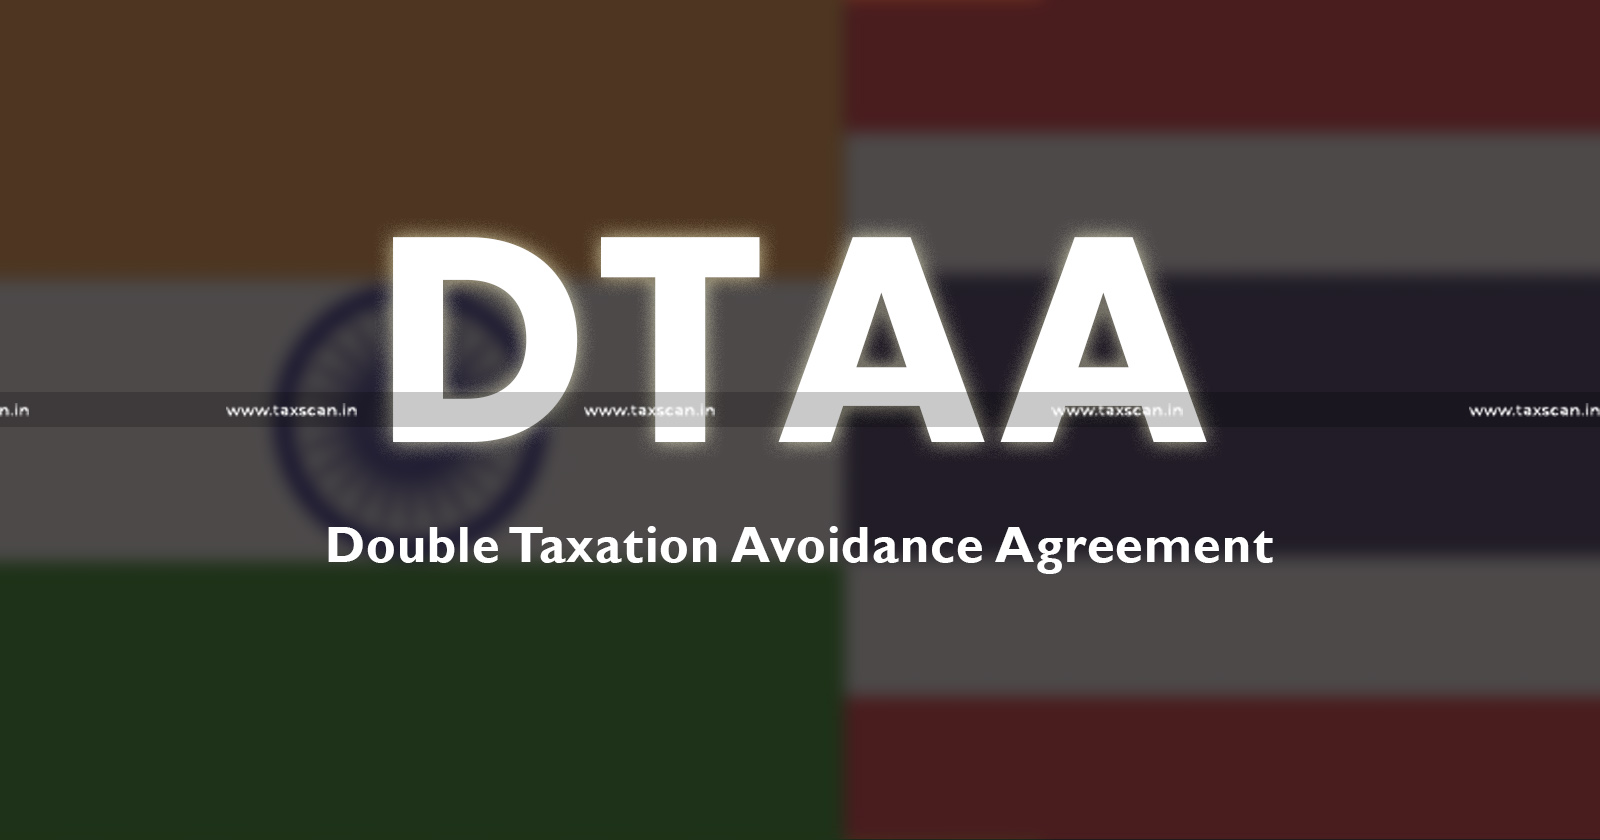 Tax Credit - Indo-Thai DTAA - DTAA - Tax - Indo-Thai DTAA can be Claimed only when Income Tax had been Paid by a Subsidiary - Subsidiary in Thailand - Taxscan